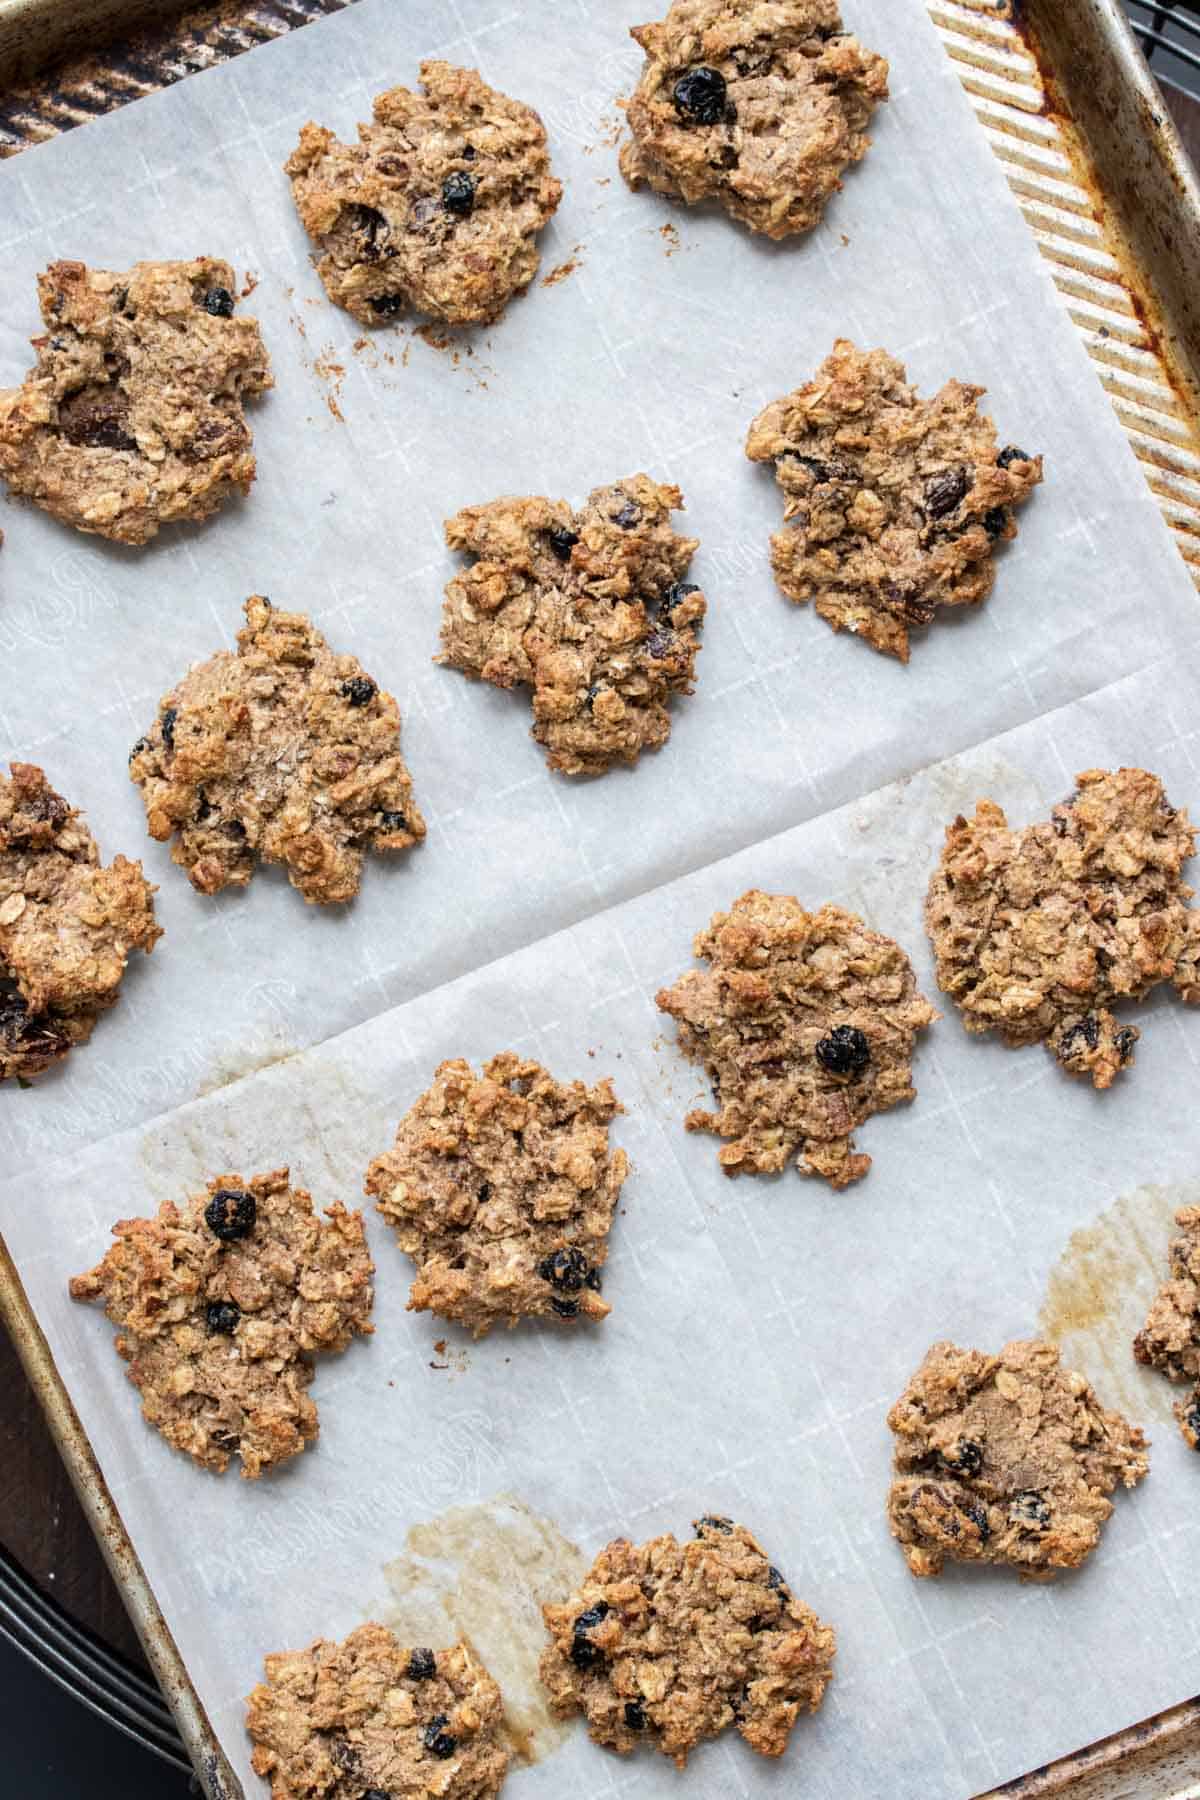 Baked oat breakfast cookies on a piece of parchment on a baking sheet